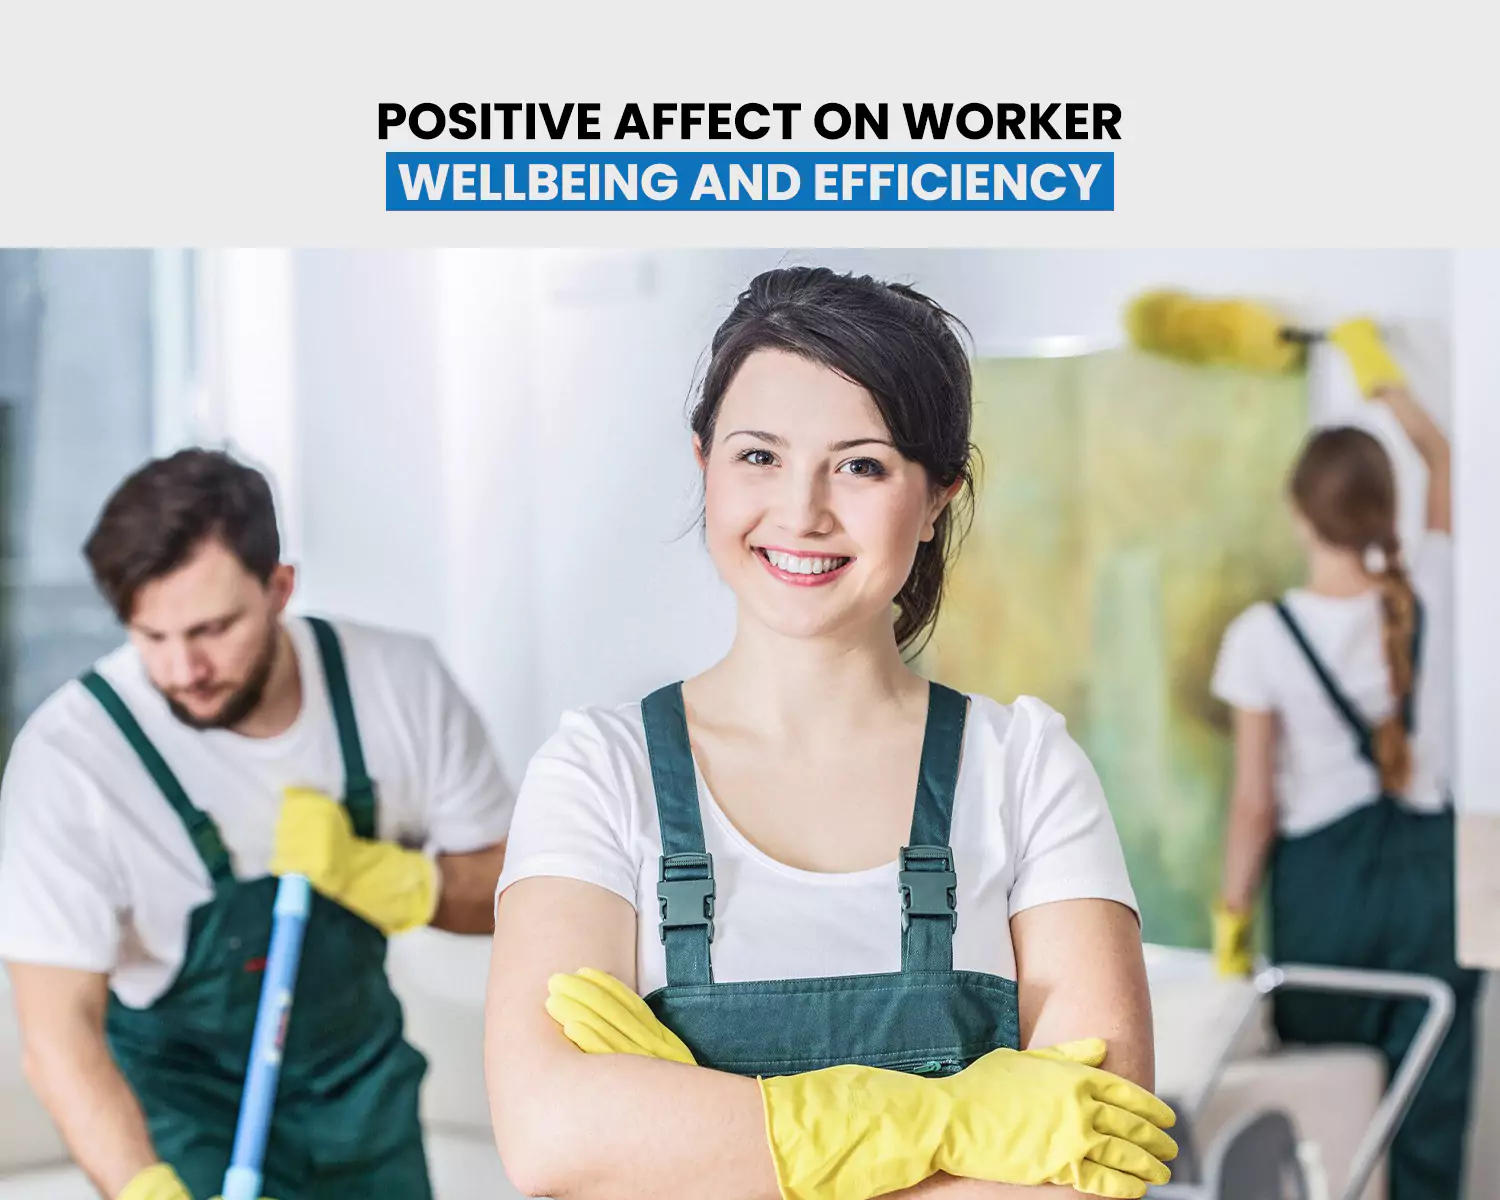 Positive Affect on Worker Wellbeing and Efficiency